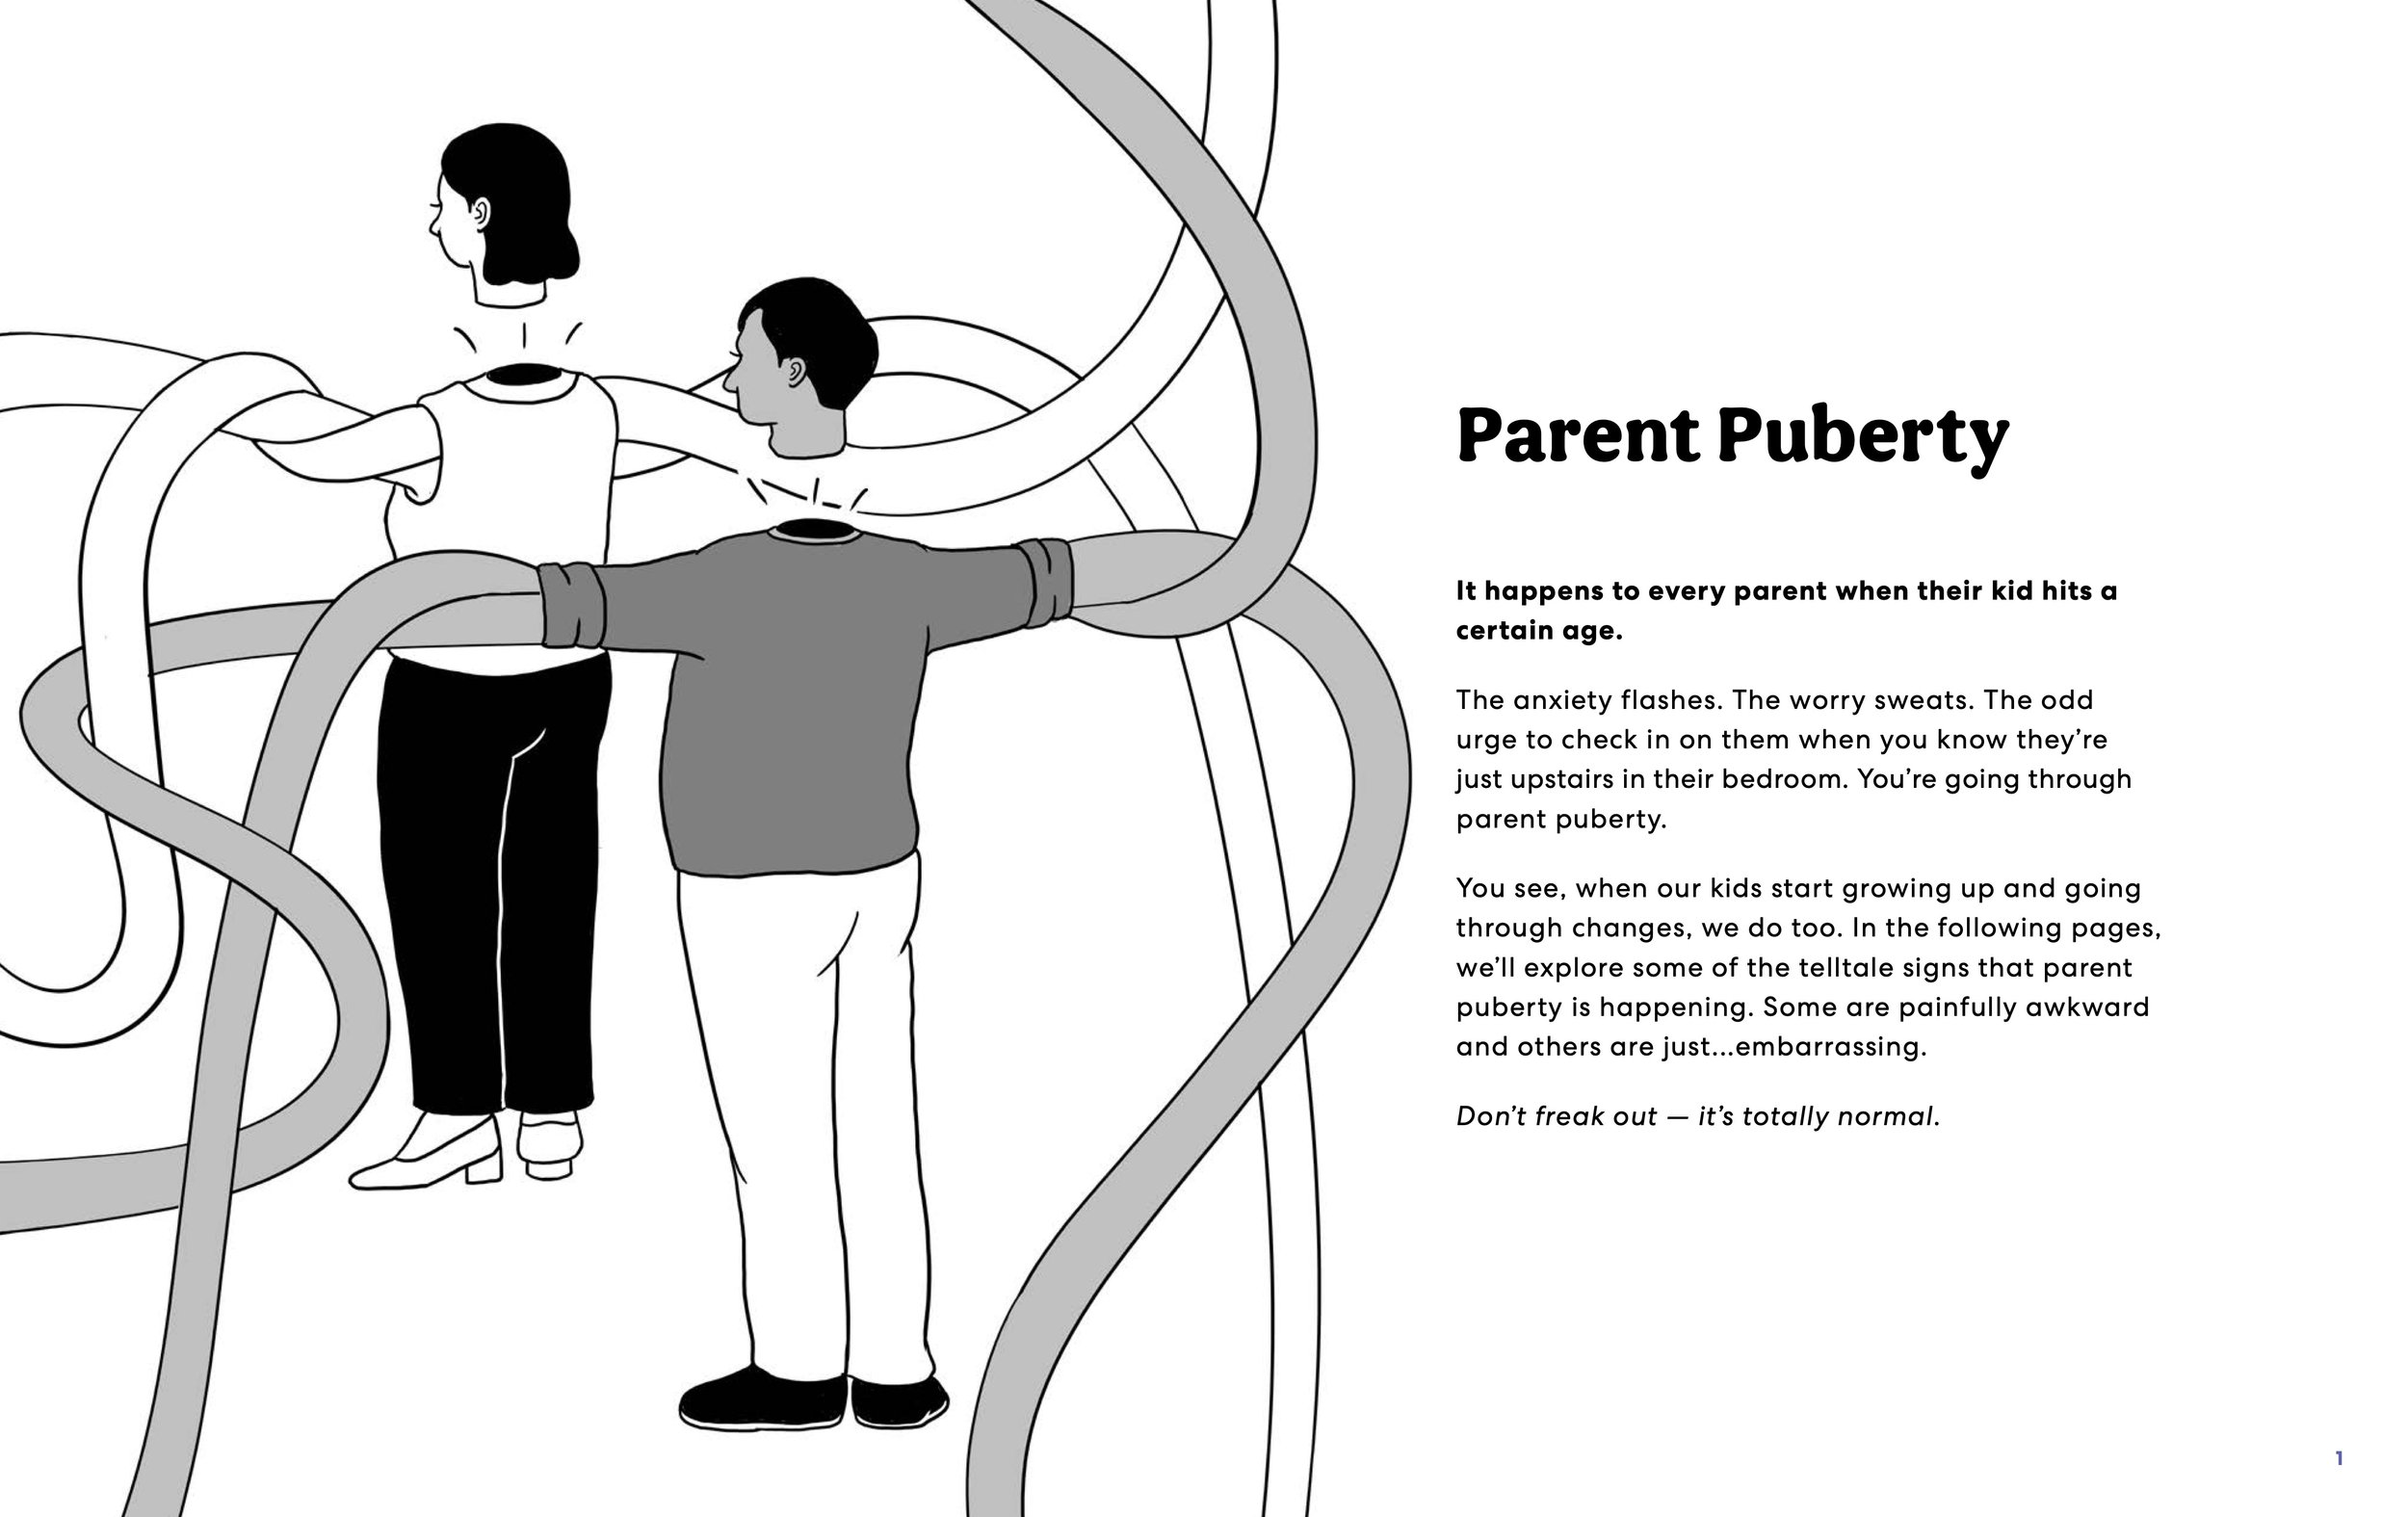 I-Feel-Funny-An-Illustrated-Guide-To-Parent-Pubery 4.jpeg